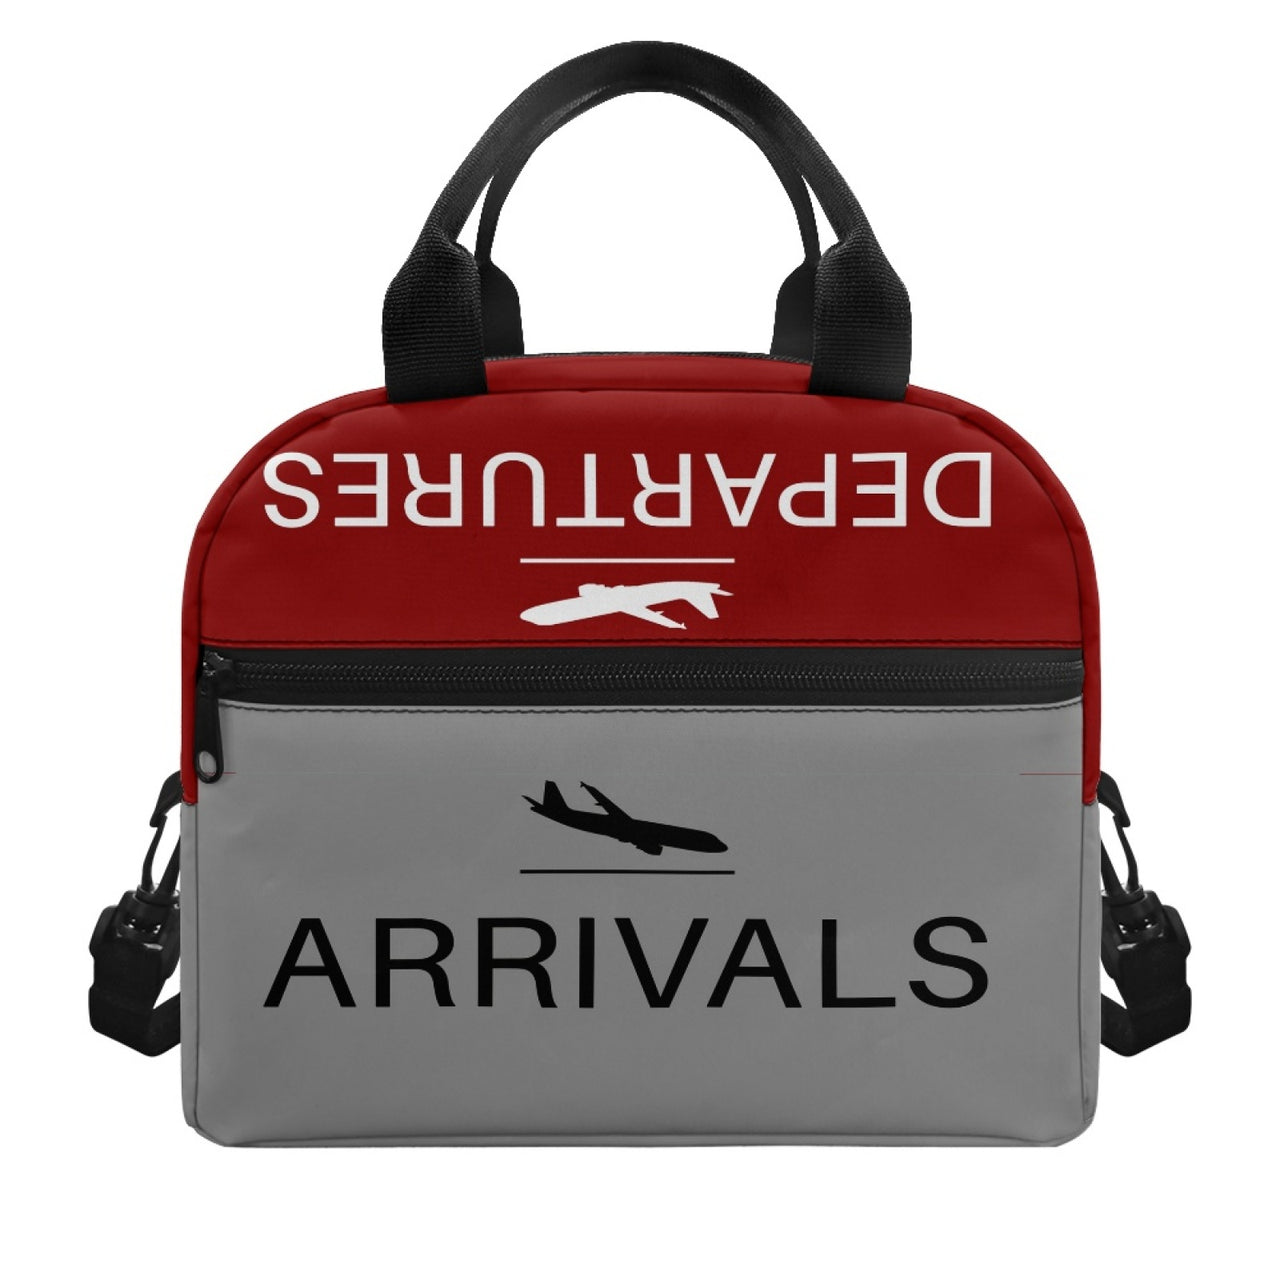 Arrival & Departures (Red) Designed Lunch Bags